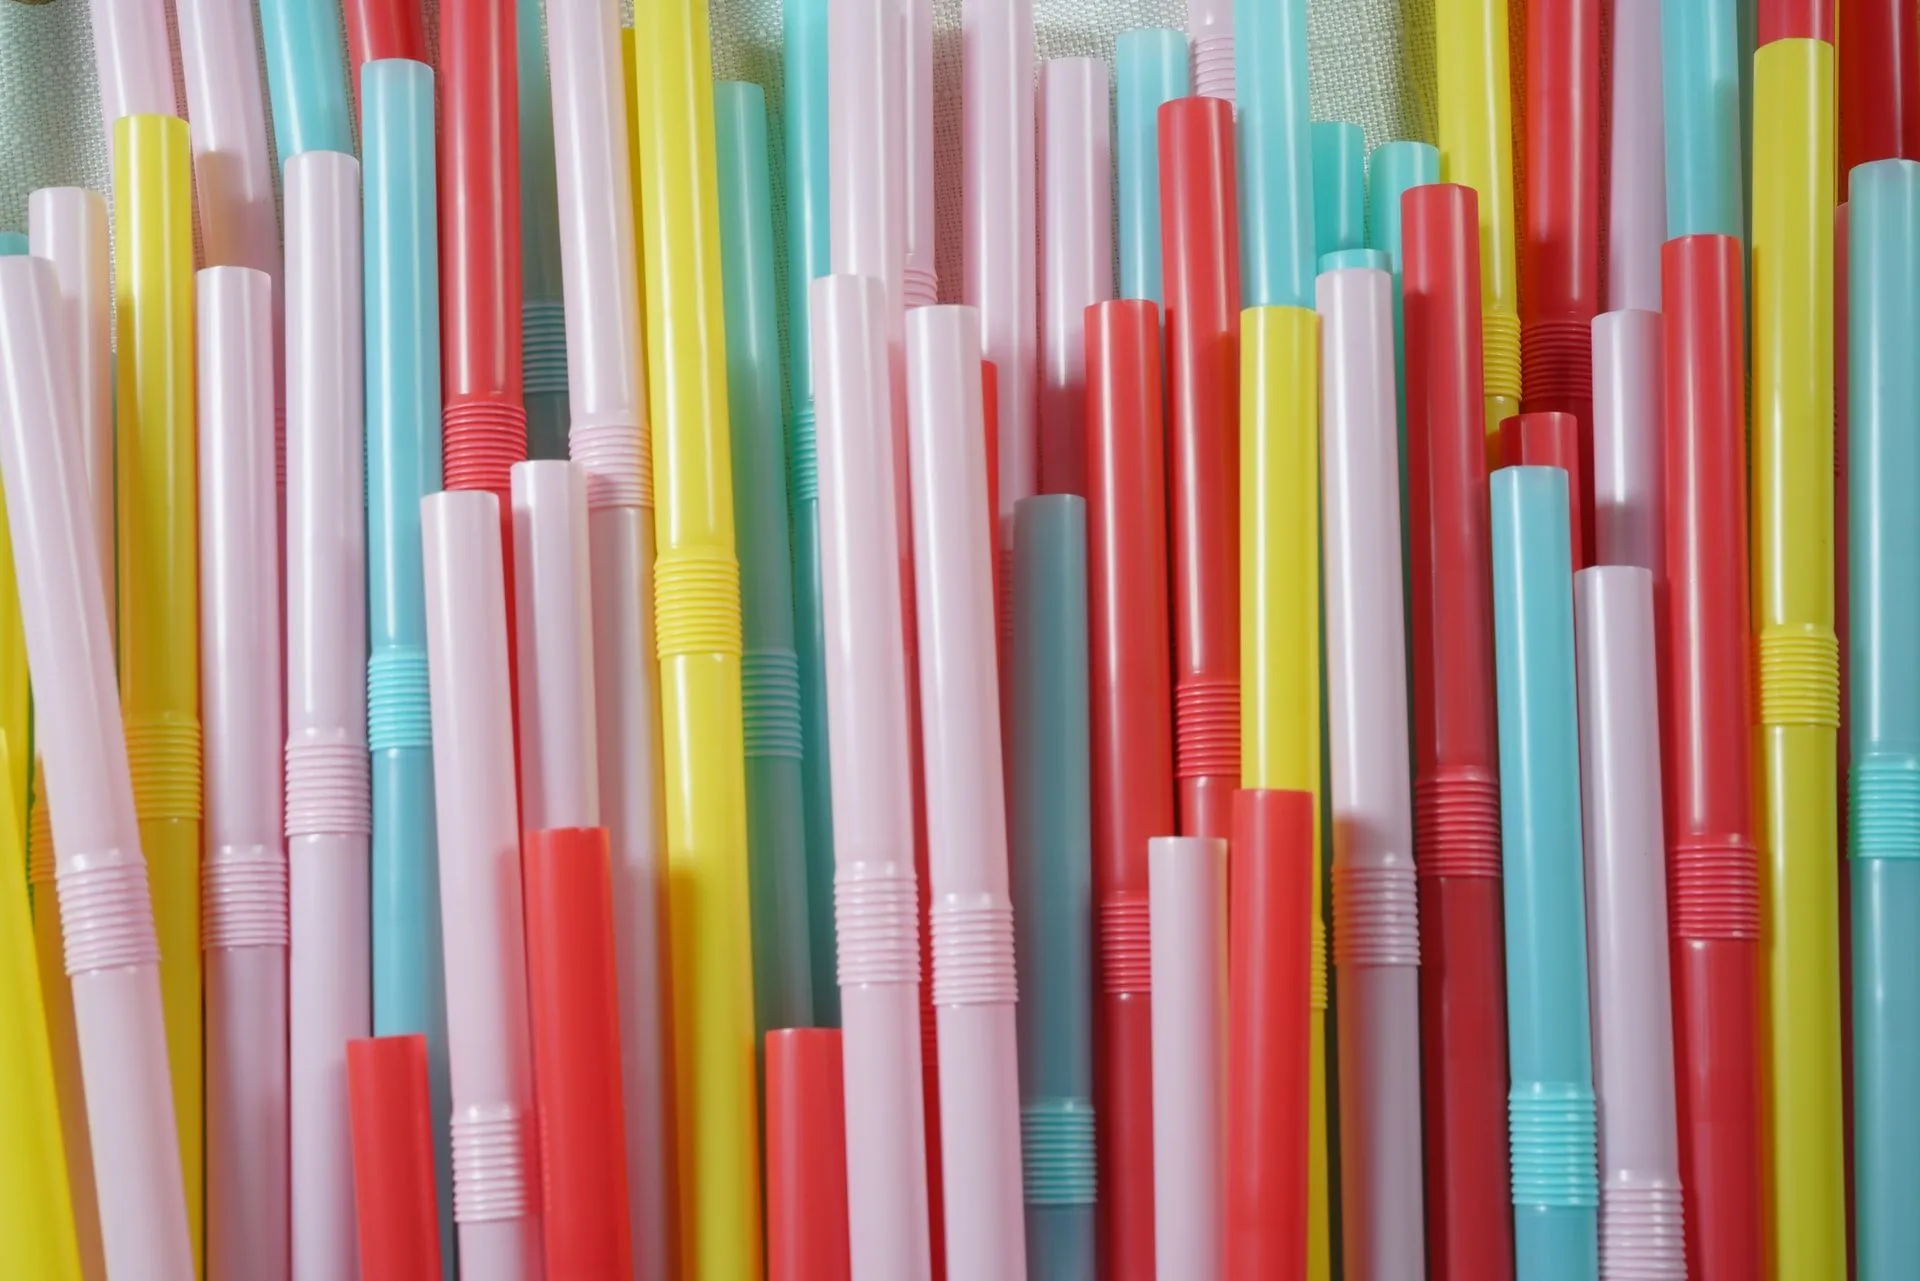 The drinking straws can also be called drinking tubes.